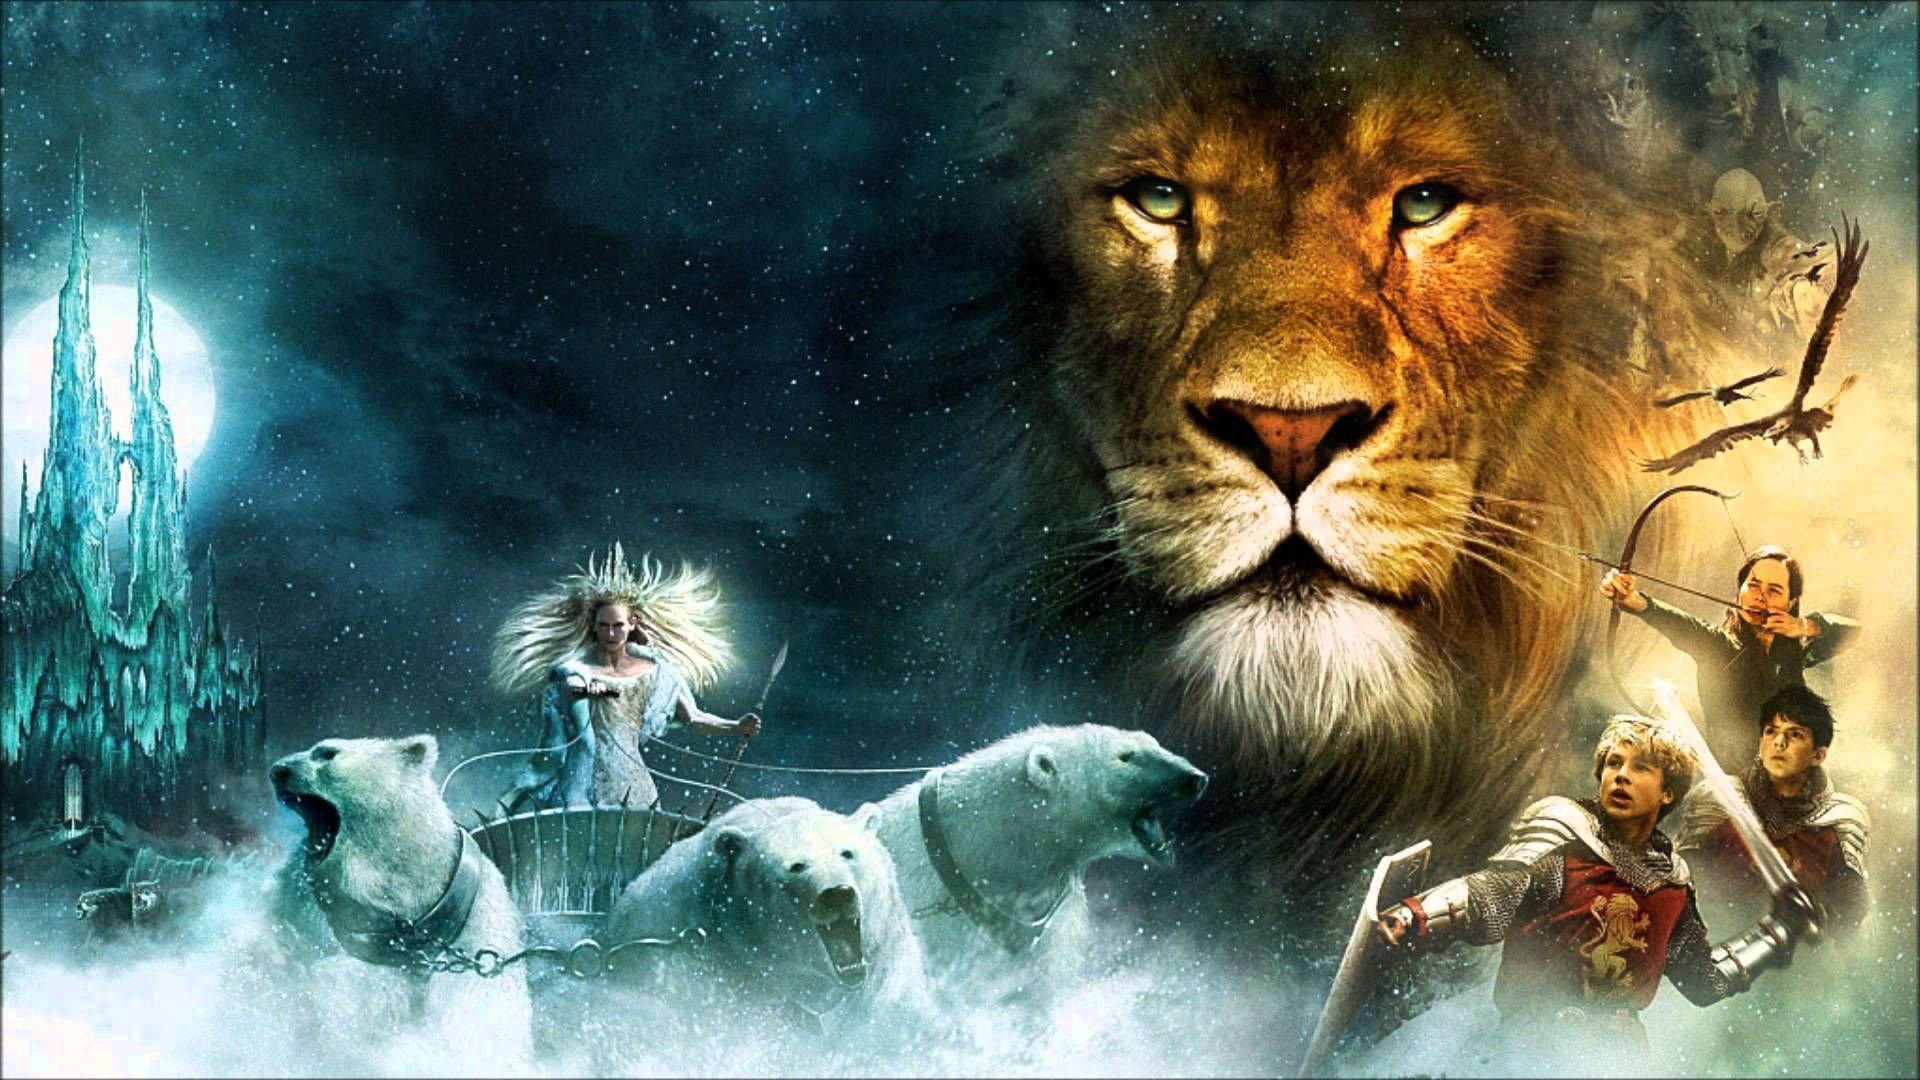 Data Src Top Narnia Wallpaper Free Download - Lion The Witch And The  Wardrobe Film Poster - 1920x1080 Wallpaper 